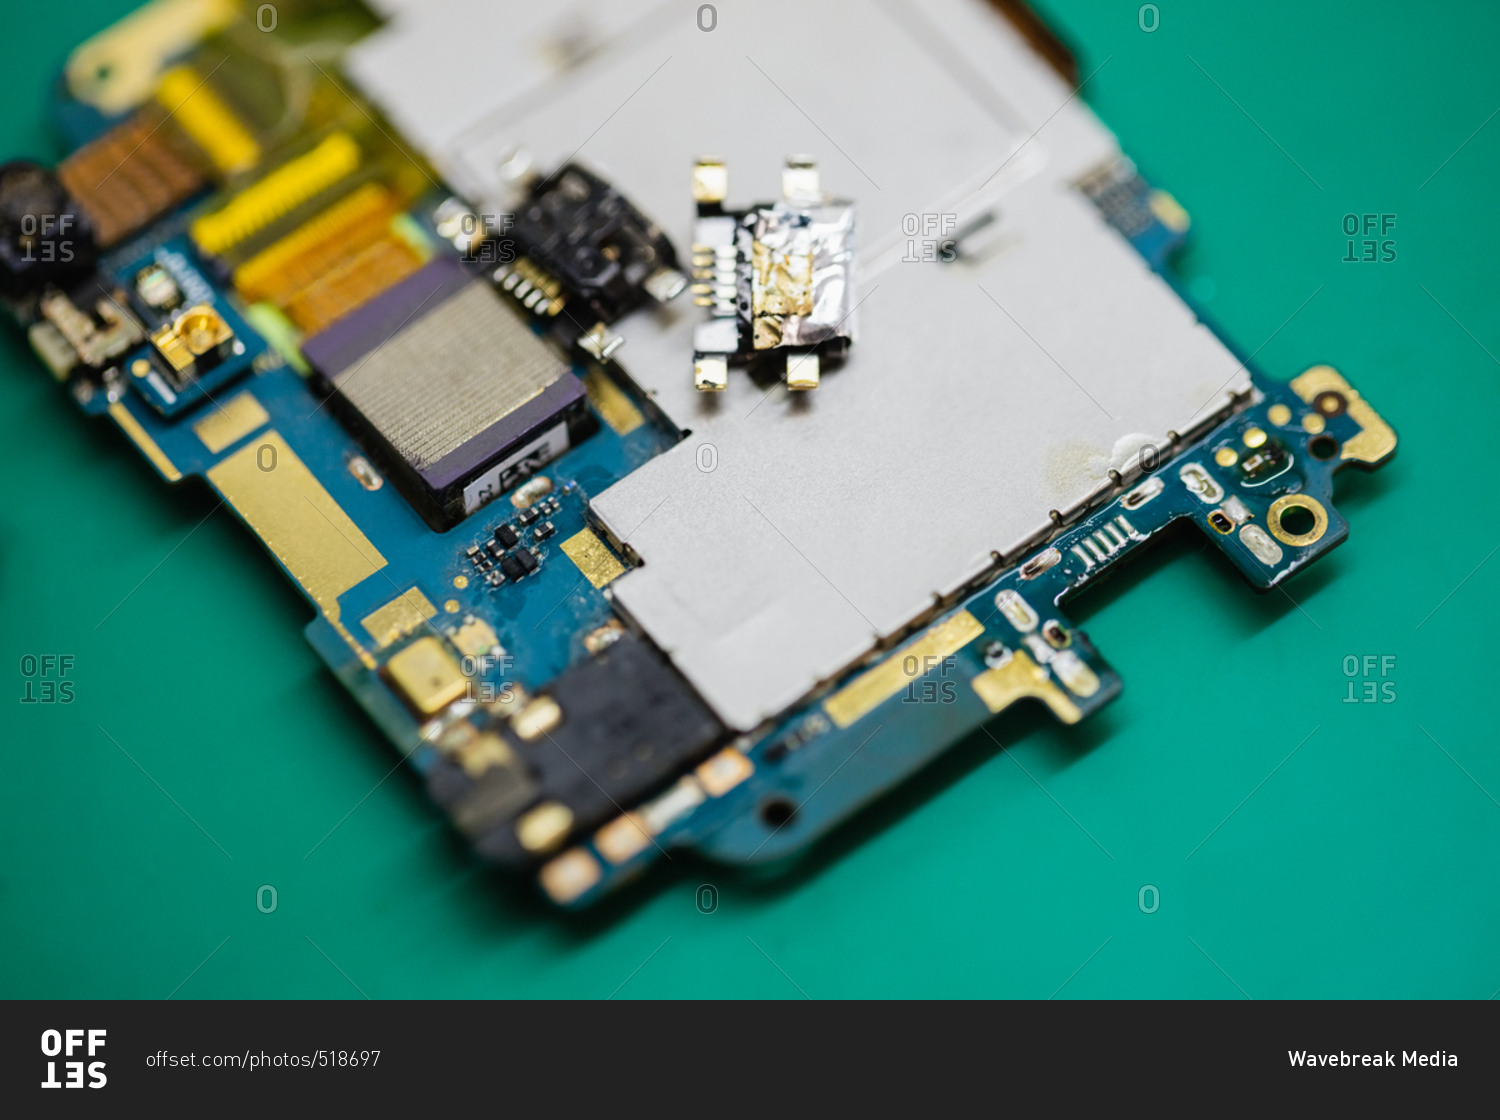 Disassembled mobile phone components